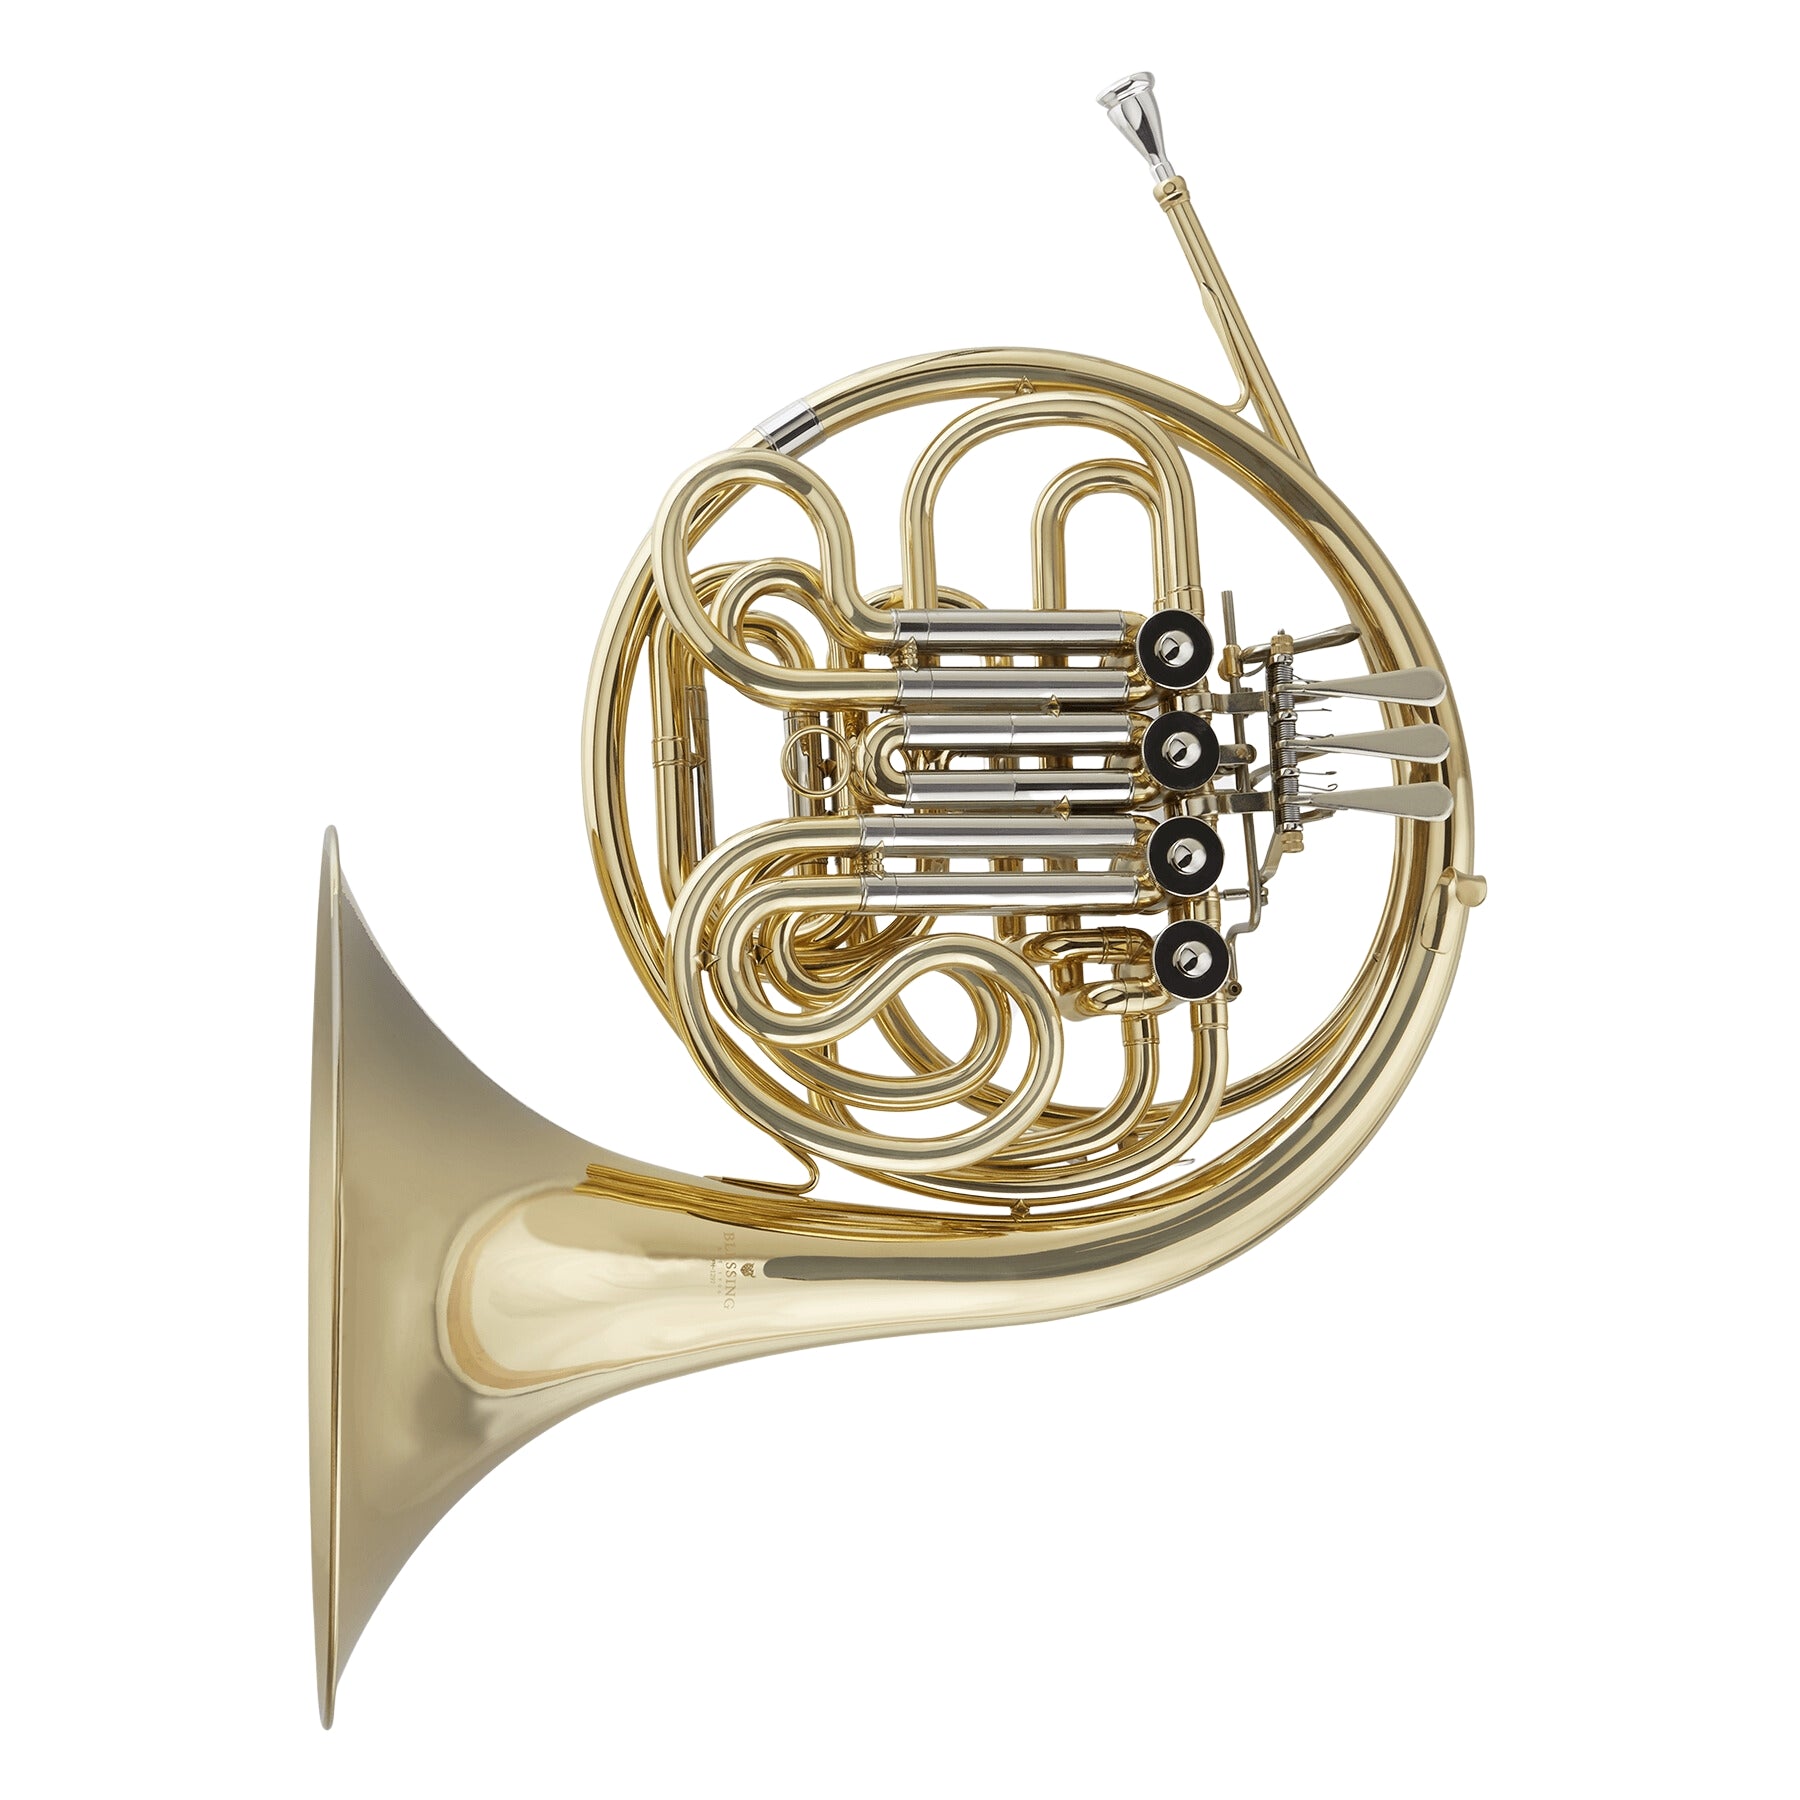 Blessing BFH-1297 Double French Horn